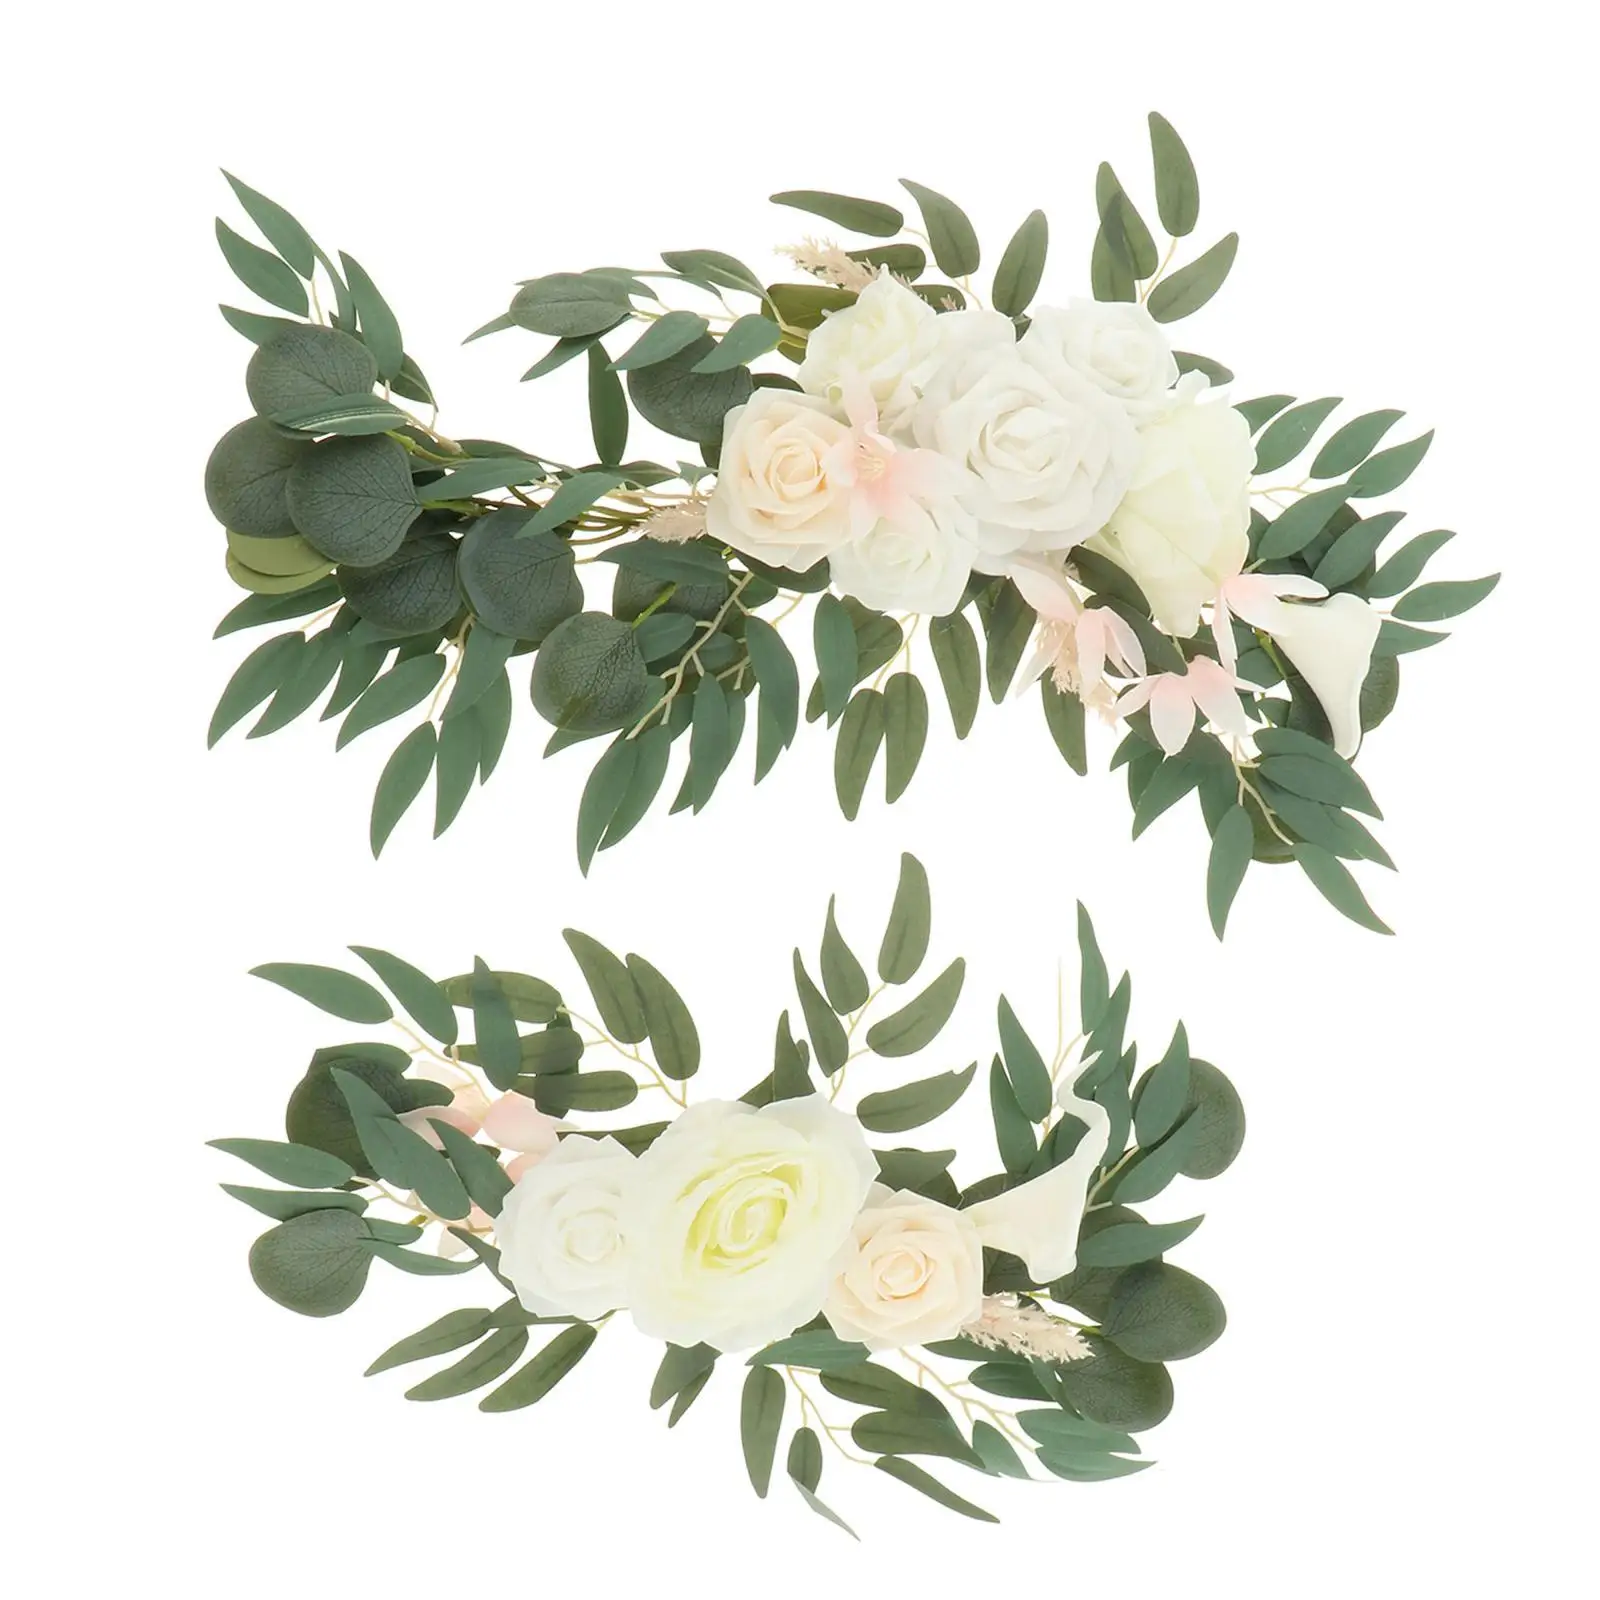 2 Pieces Artificial Flower Swag Wedding Arch Flowers for Wedding Table Centerpieces